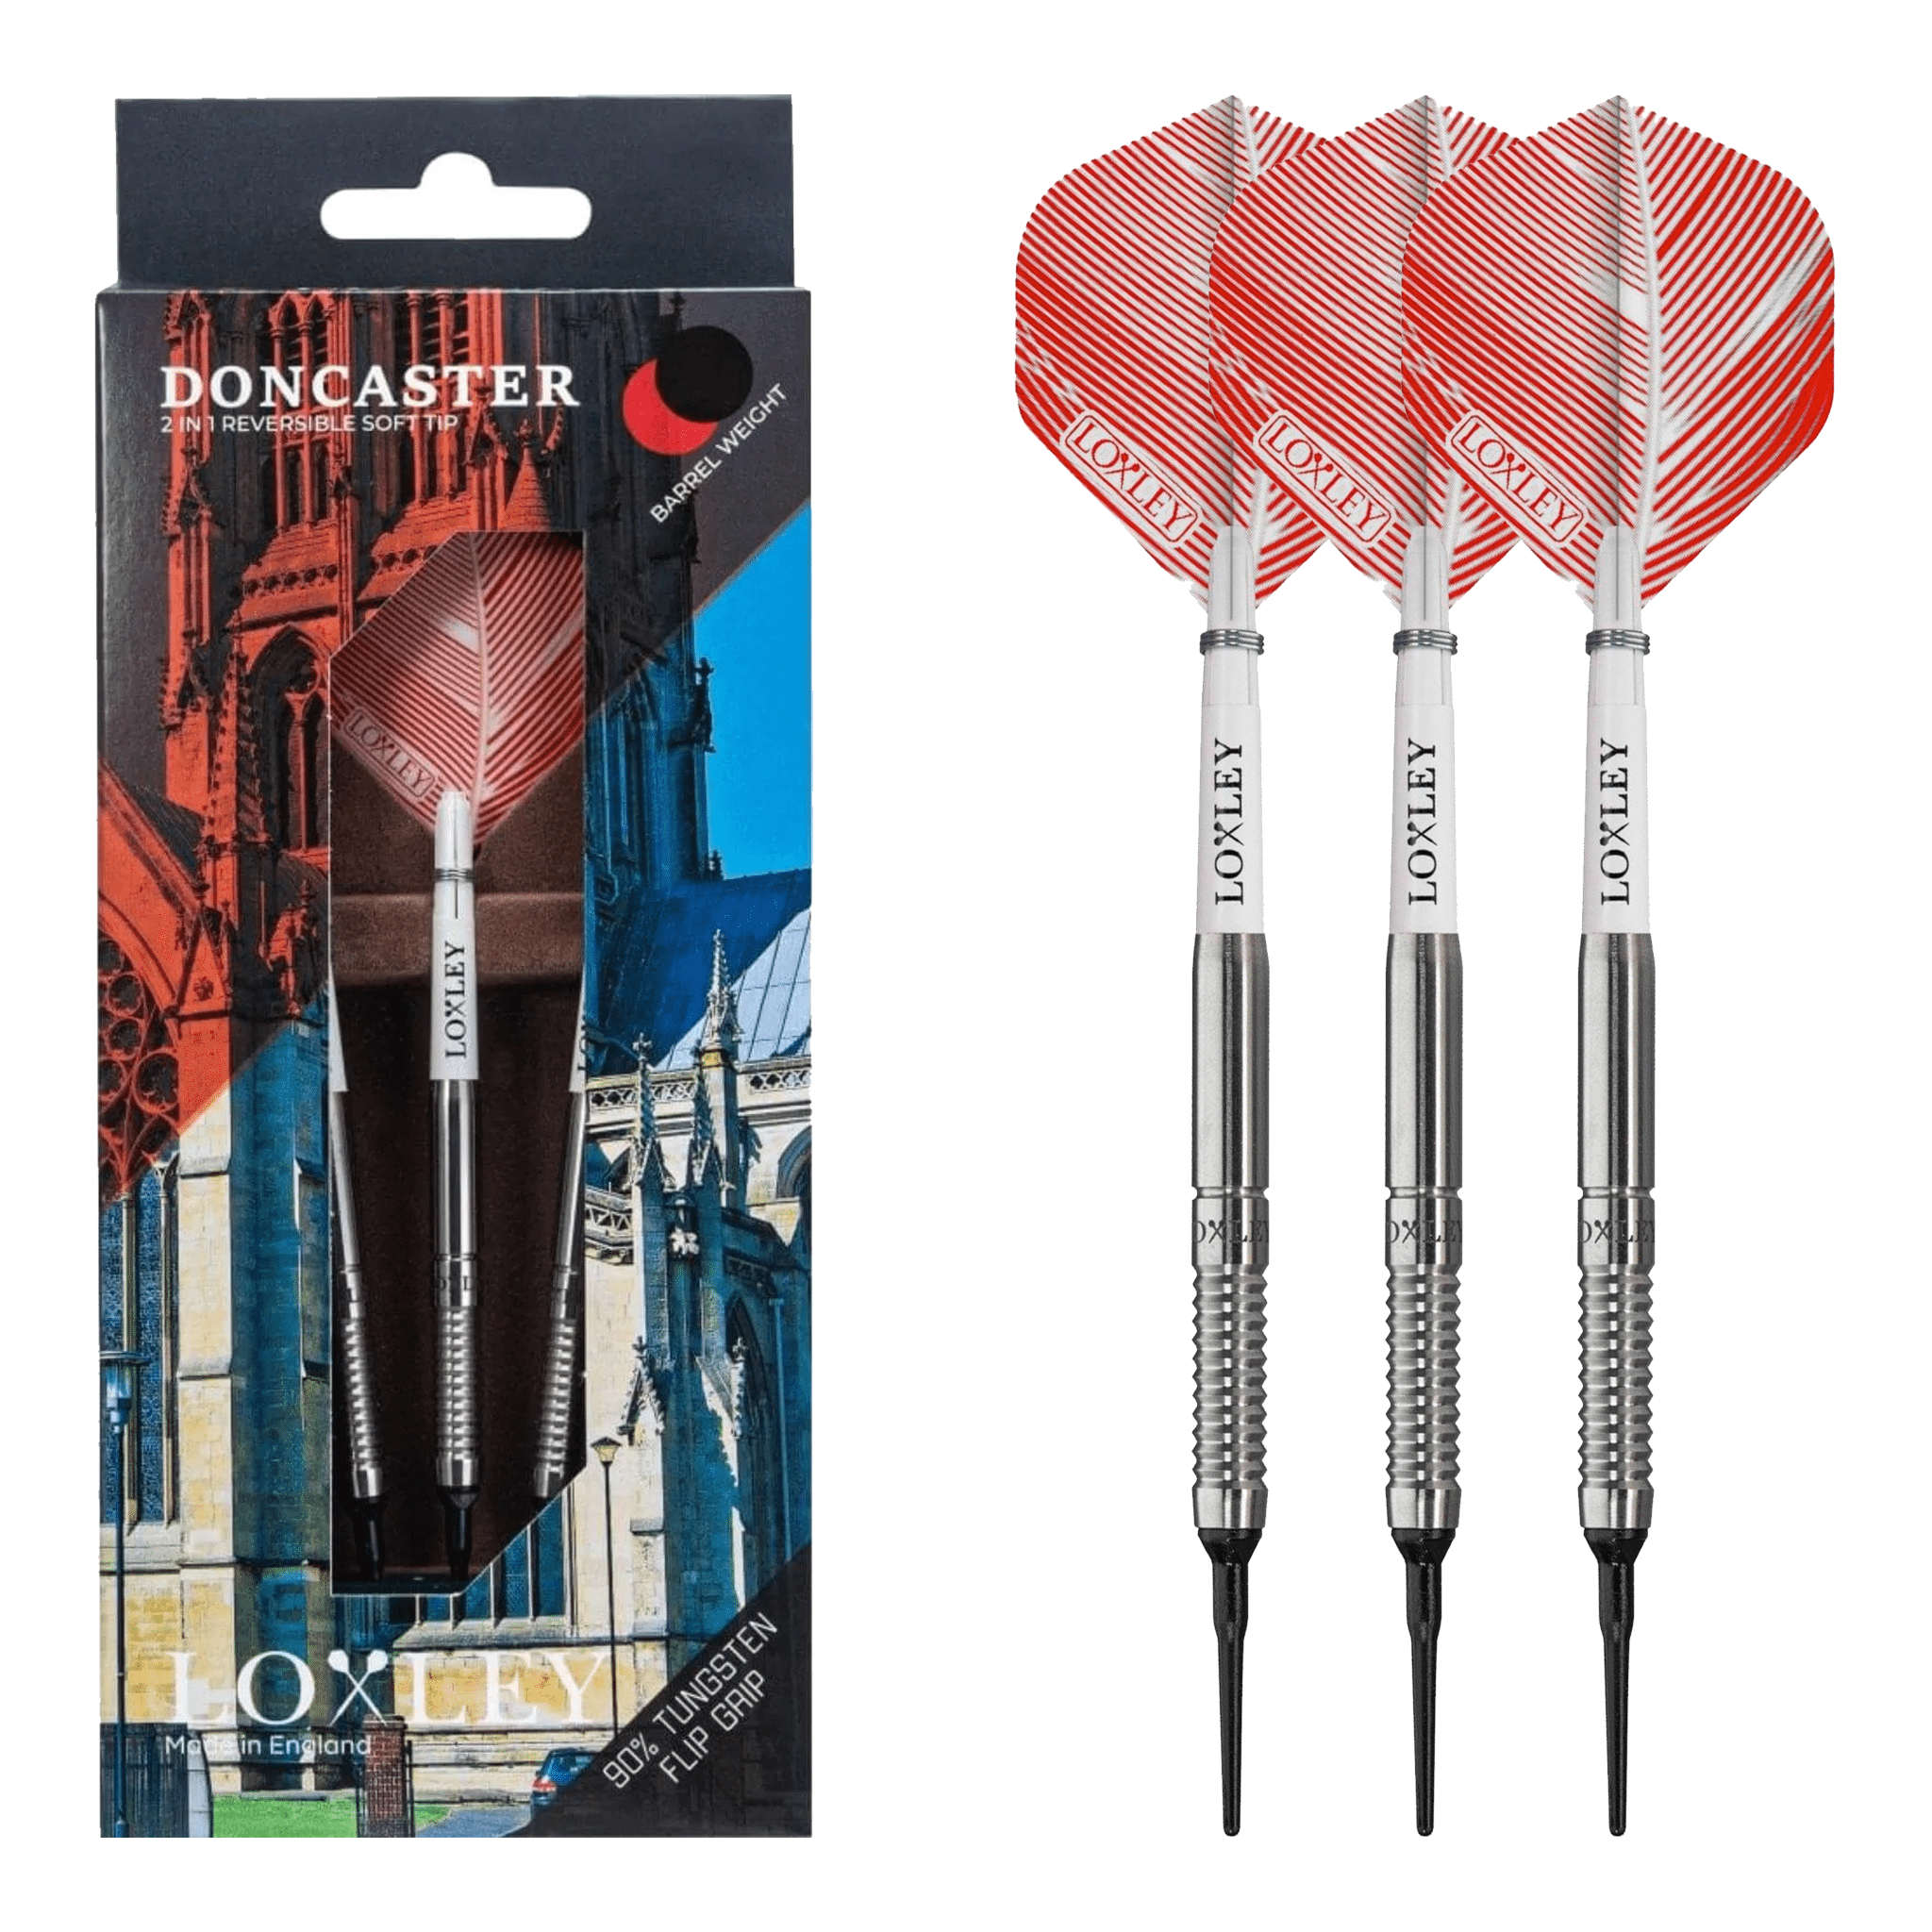 Loxley Doncaster - 90% Tungsten Soft Tip Darts 18 Grams Darts